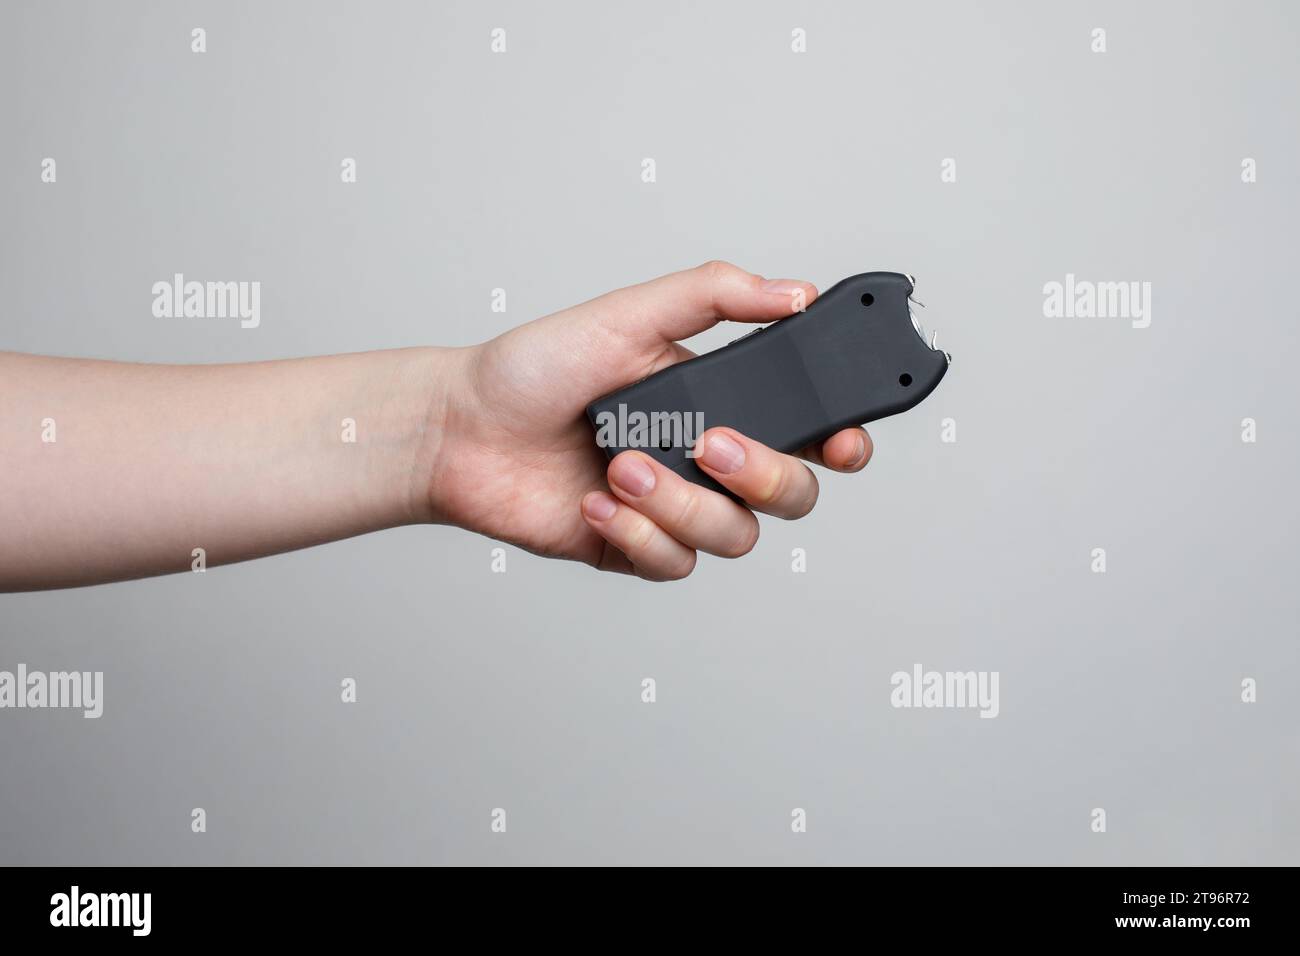 Taser in human's hand close-up on a gray background Stock Photo